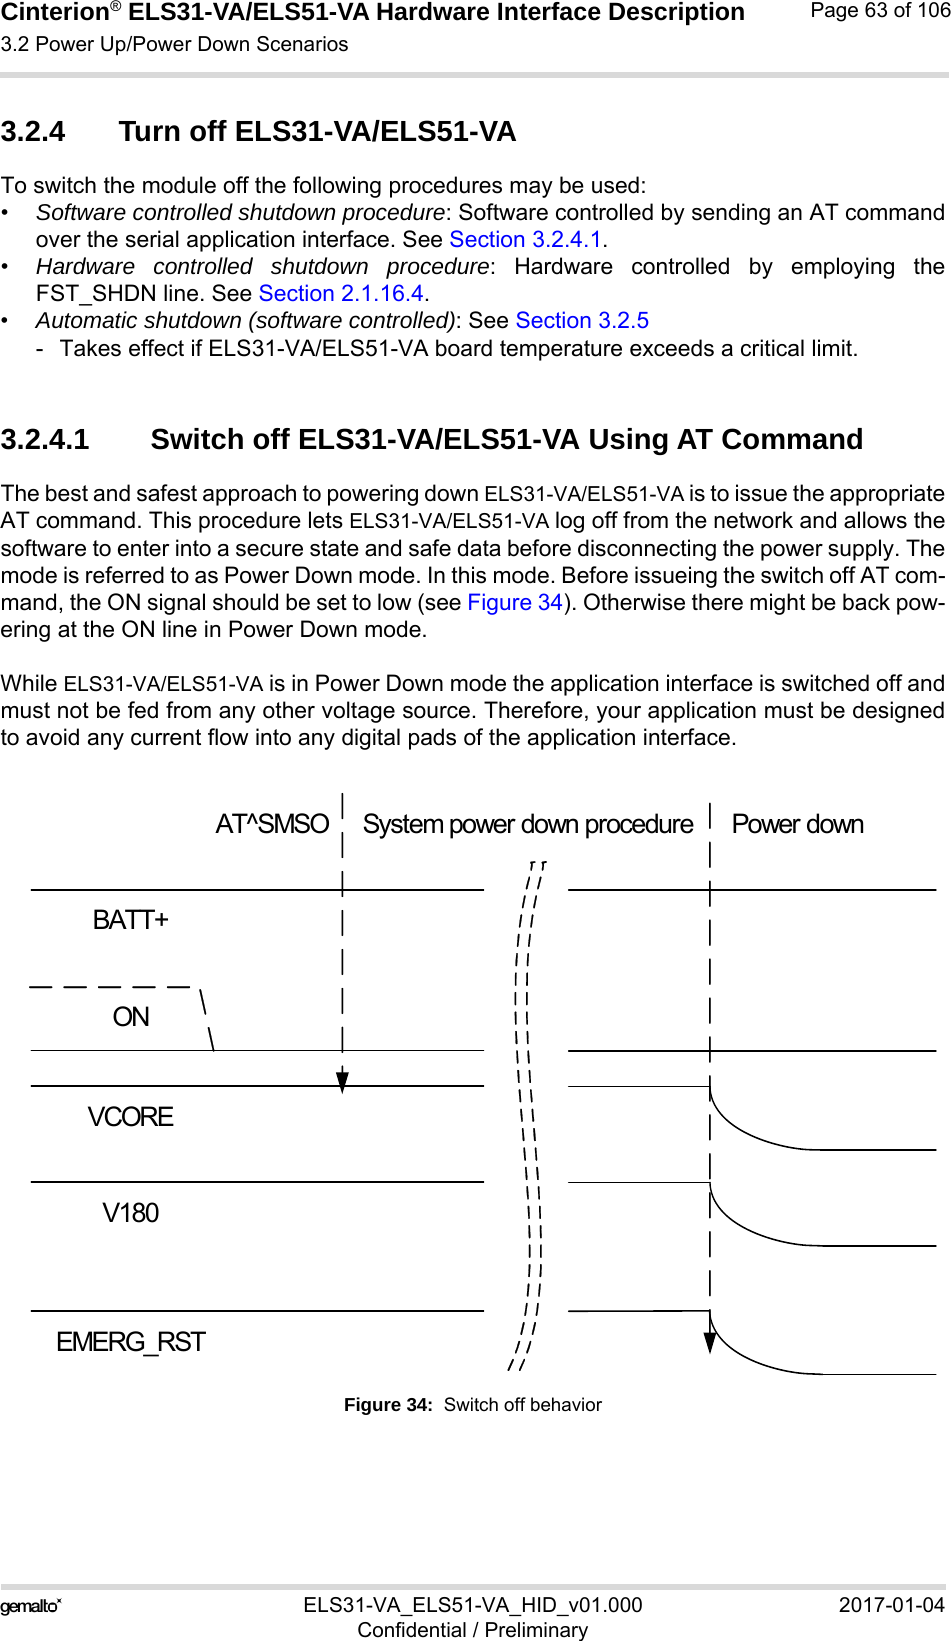 Cinterion® ELS31-VA/ELS51-VA Hardware Interface Description3.2 Power Up/Power Down Scenarios76ELS31-VA_ELS51-VA_HID_v01.000 2017-01-04Confidential / PreliminaryPage 63 of 1063.2.4 Turn off ELS31-VA/ELS51-VA To switch the module off the following procedures may be used: •Software controlled shutdown procedure: Software controlled by sending an AT commandover the serial application interface. See Section 3.2.4.1.•Hardware controlled shutdown procedure: Hardware controlled by employing theFST_SHDN line. See Section 2.1.16.4.•Automatic shutdown (software controlled): See Section 3.2.5- Takes effect if ELS31-VA/ELS51-VA board temperature exceeds a critical limit.3.2.4.1 Switch off ELS31-VA/ELS51-VA Using AT CommandThe best and safest approach to powering down ELS31-VA/ELS51-VA is to issue the appropriateAT command. This procedure lets ELS31-VA/ELS51-VA log off from the network and allows thesoftware to enter into a secure state and safe data before disconnecting the power supply. Themode is referred to as Power Down mode. In this mode. Before issueing the switch off AT com-mand, the ON signal should be set to low (see Figure 34). Otherwise there might be back pow-ering at the ON line in Power Down mode.While ELS31-VA/ELS51-VA is in Power Down mode the application interface is switched off andmust not be fed from any other voltage source. Therefore, your application must be designedto avoid any current flow into any digital pads of the application interface. Figure 34:  Switch off behaviorBATT+ONVCOREV180AT^SMSO System power down procedure Power downEMERG_RST